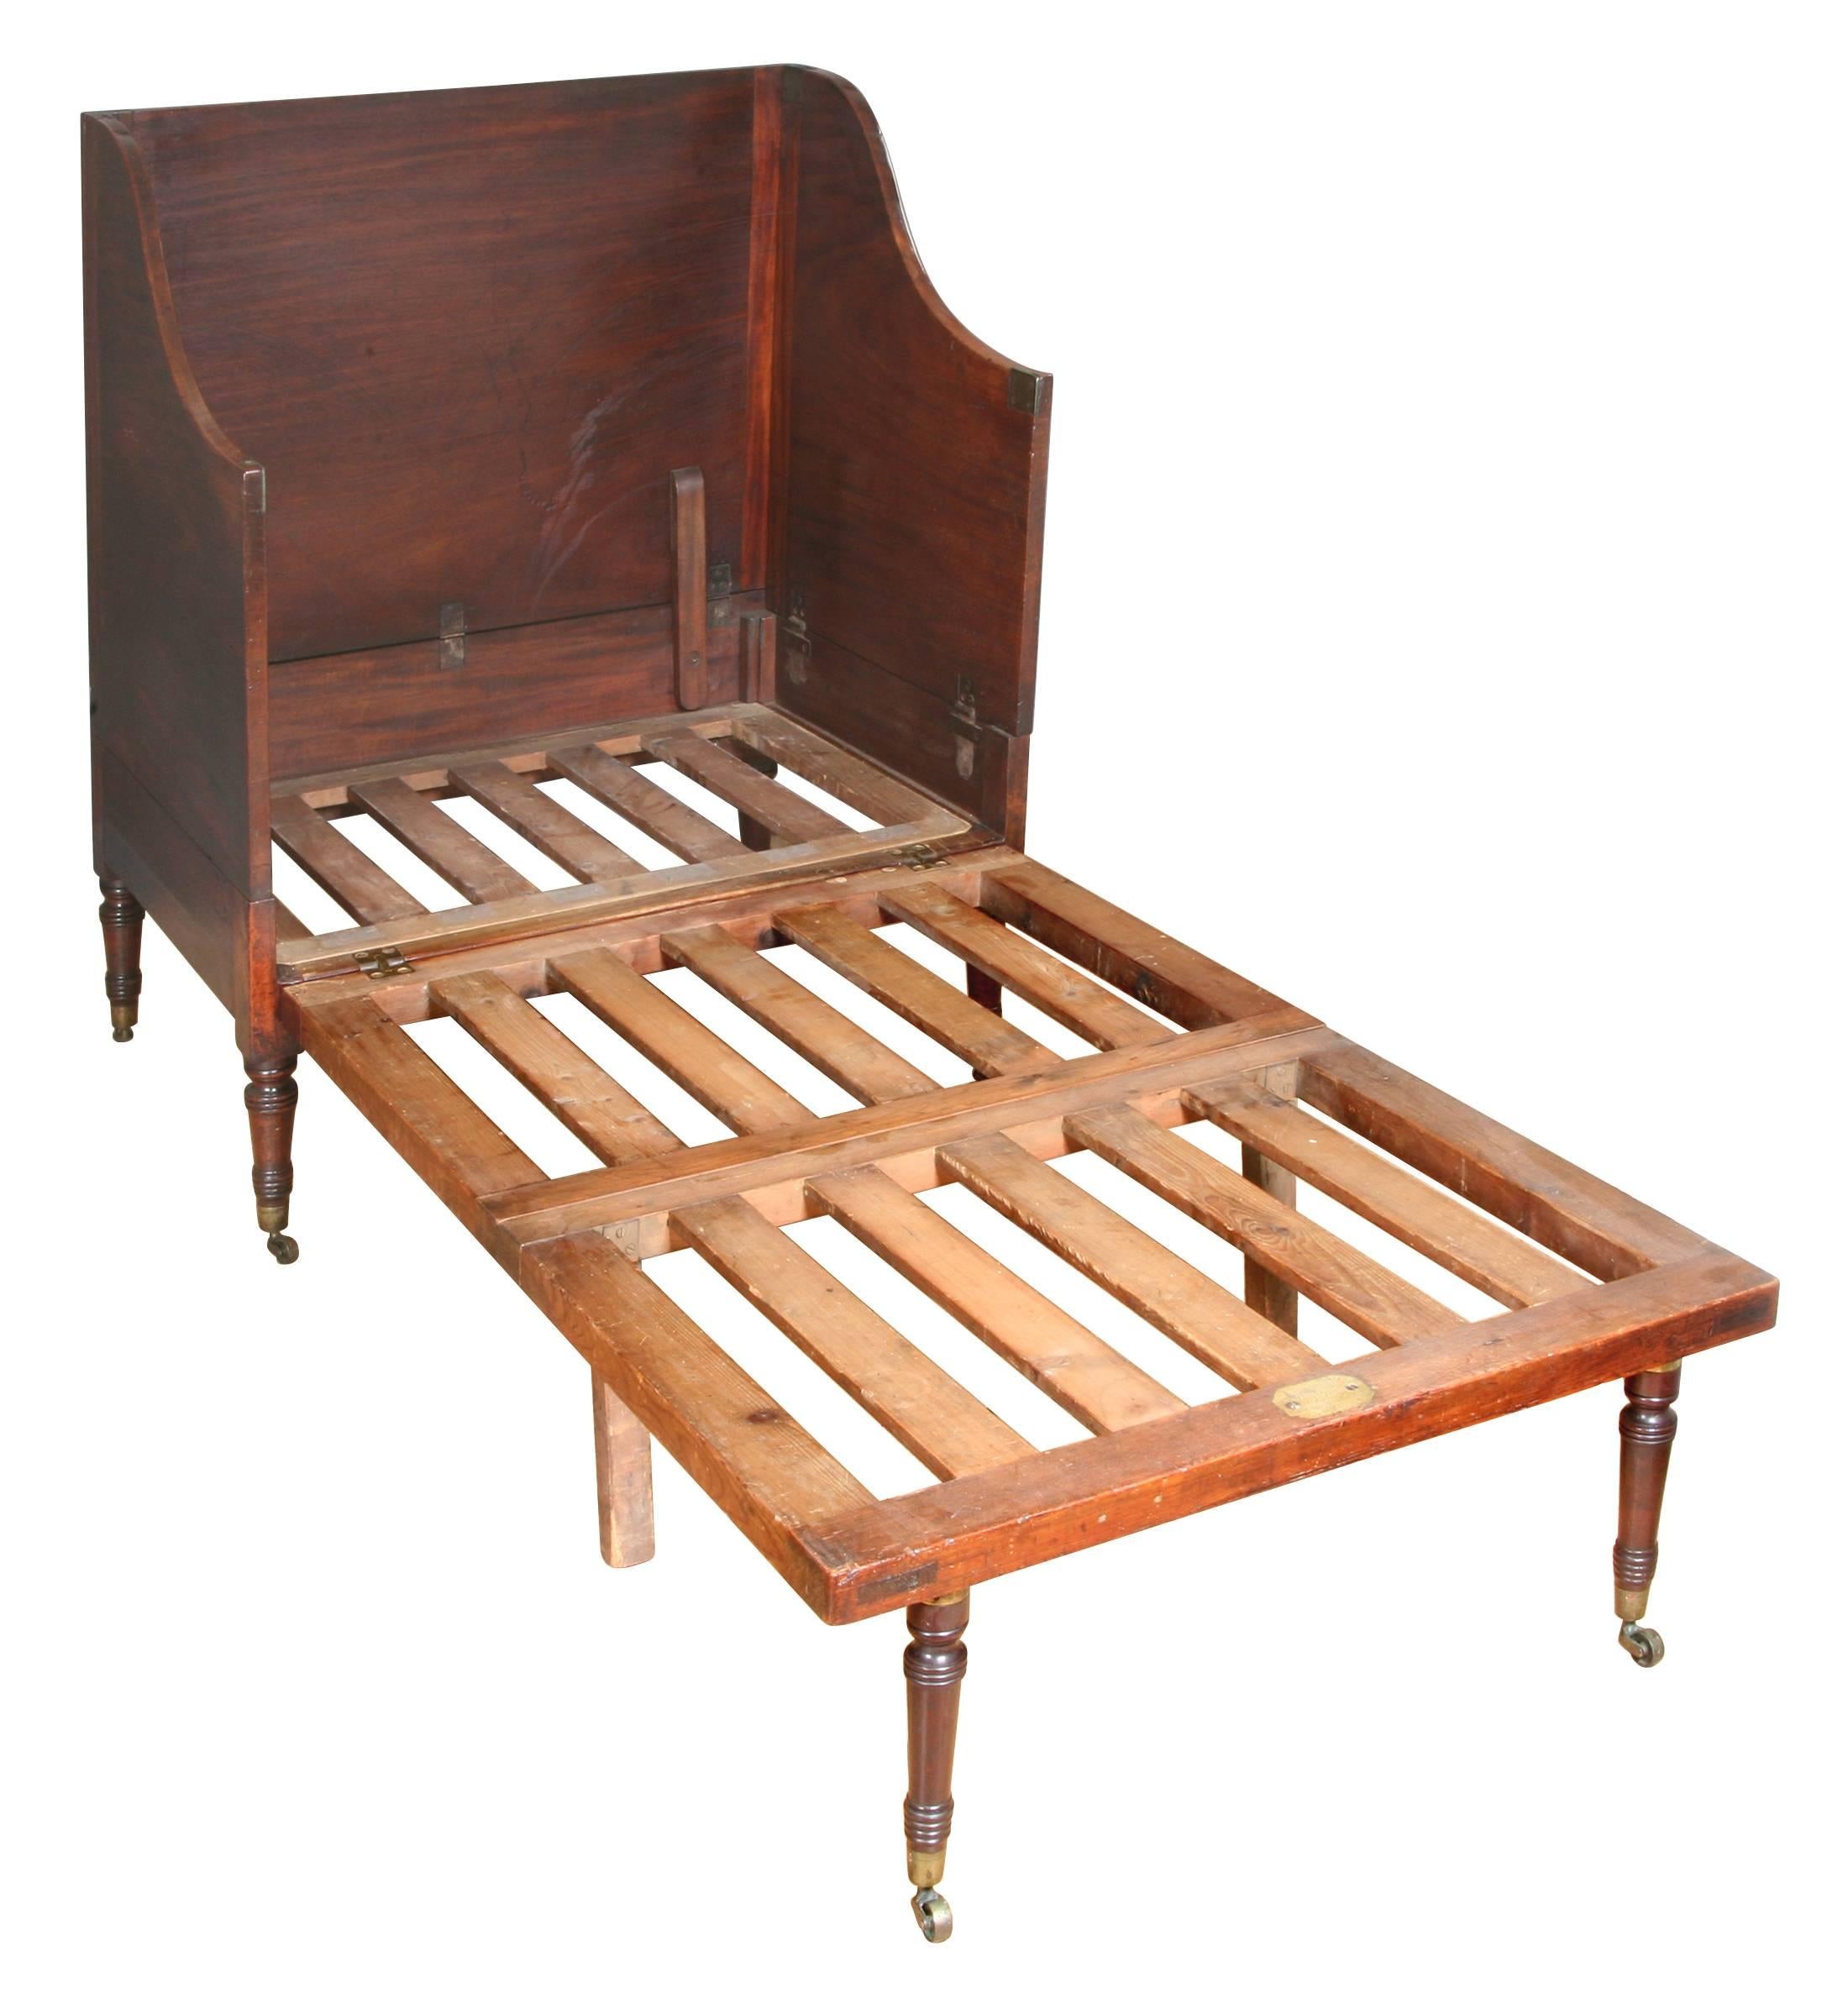 This mahogany chair bed is a design commonly associated with the Catherine Street makers of Thomas Butler and Morgan and Sanders. The pine frame folds out to convert the chair to a bed with a pair of turned legs screwed into the end to support it.